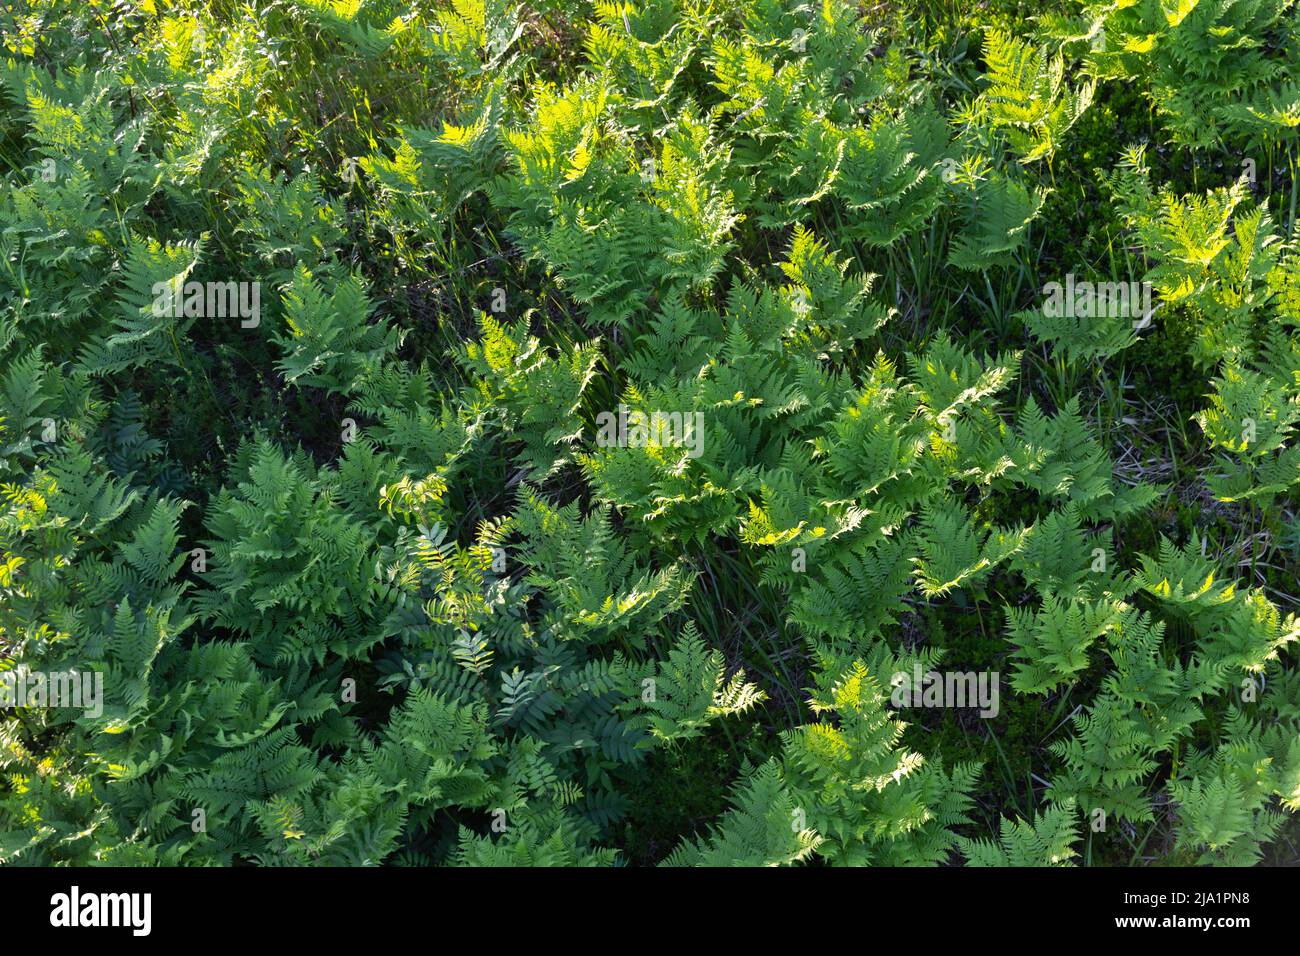 Green fern leaves growing on a forest ground, natural photo background Stock Photo